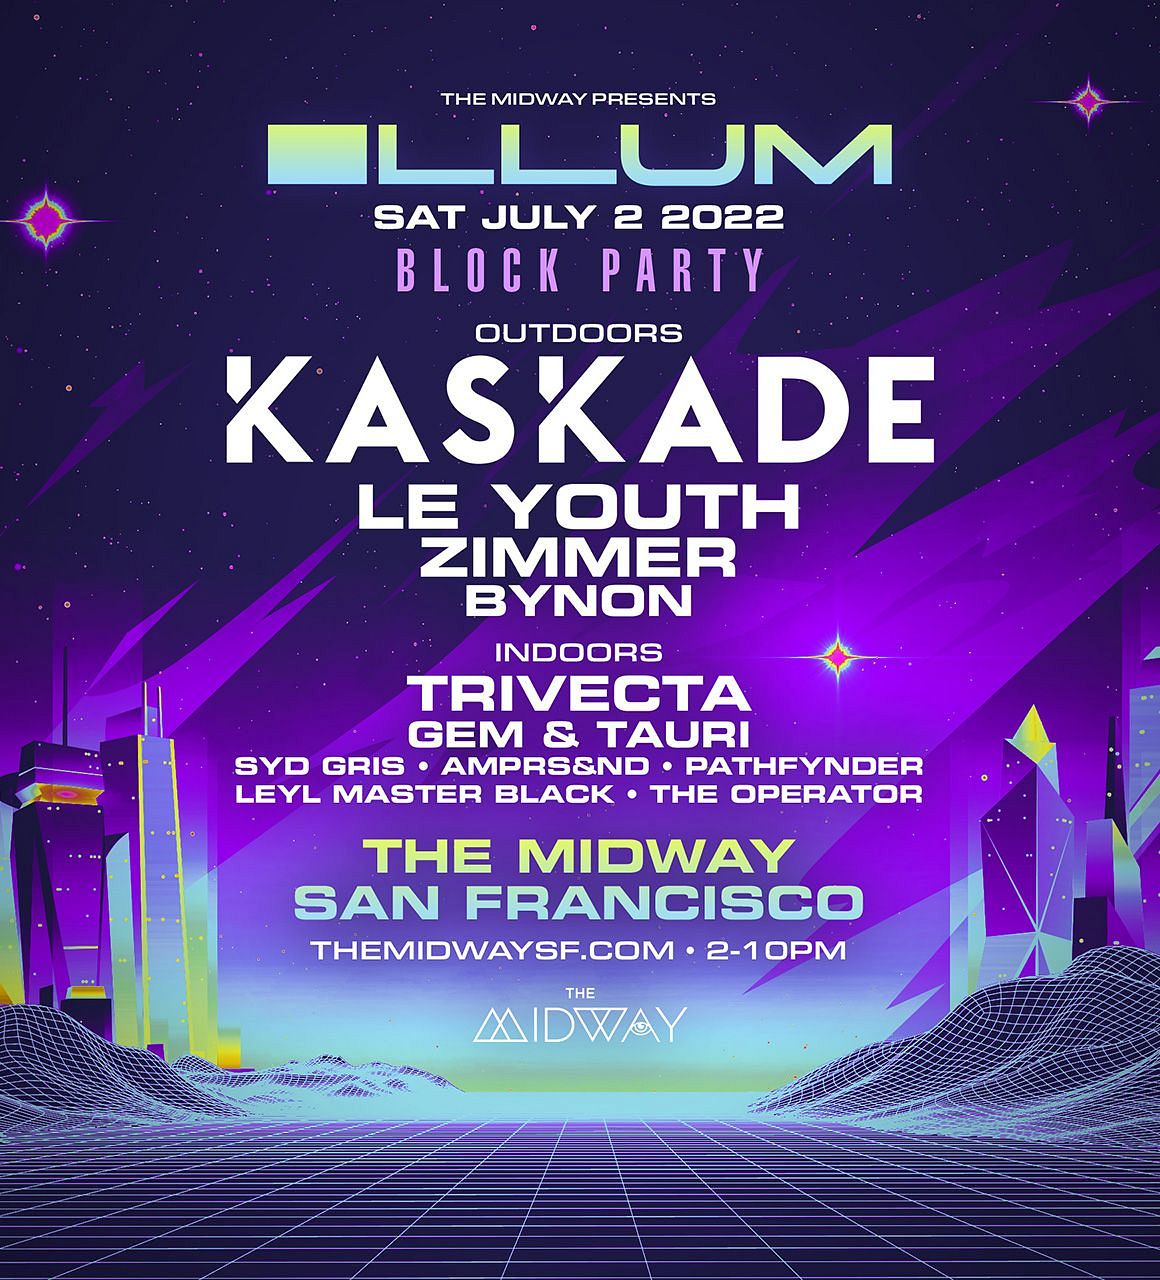 illum Kaskade Block Party Tickets at The Midway in San Francisco by The Midway SF Tixr